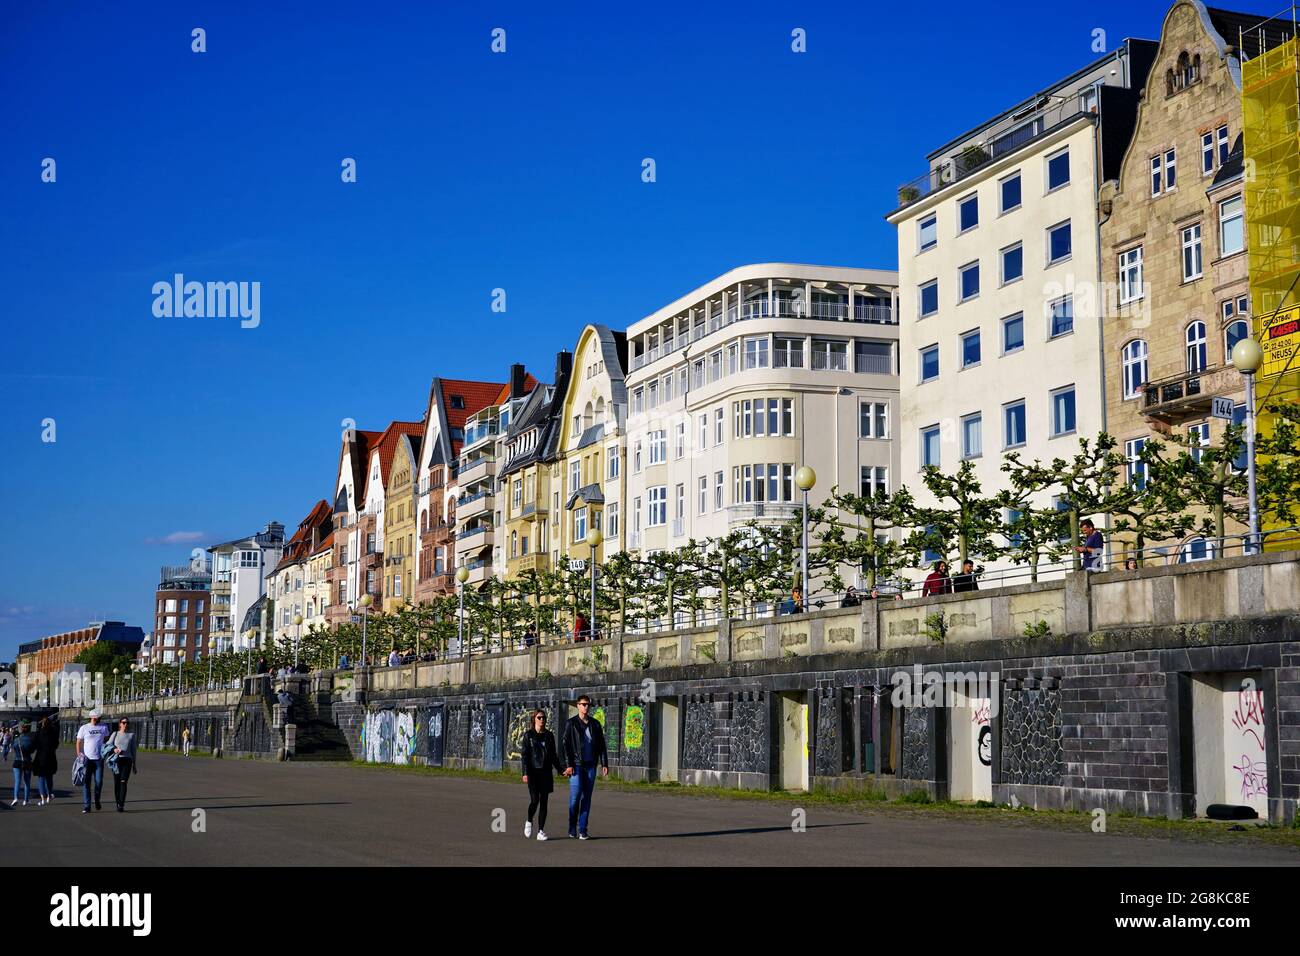 Mannesmannufer (river promenade) at the Rhine river in Düsseldorf, Germany, with beautiful private house fronts. Stock Photo